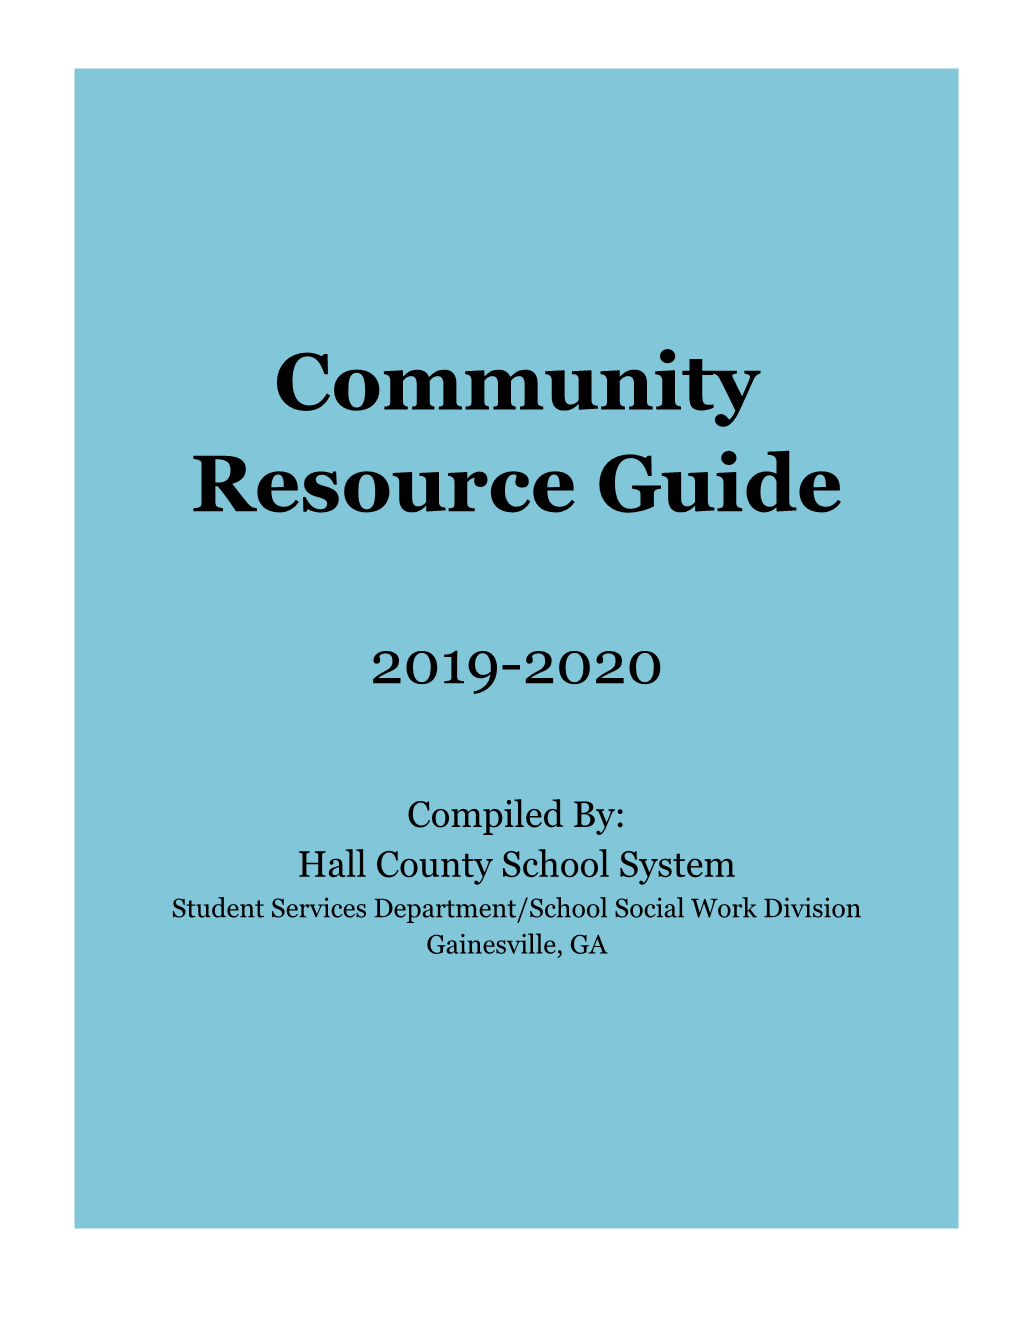 Community Resource Guide 2019-2020